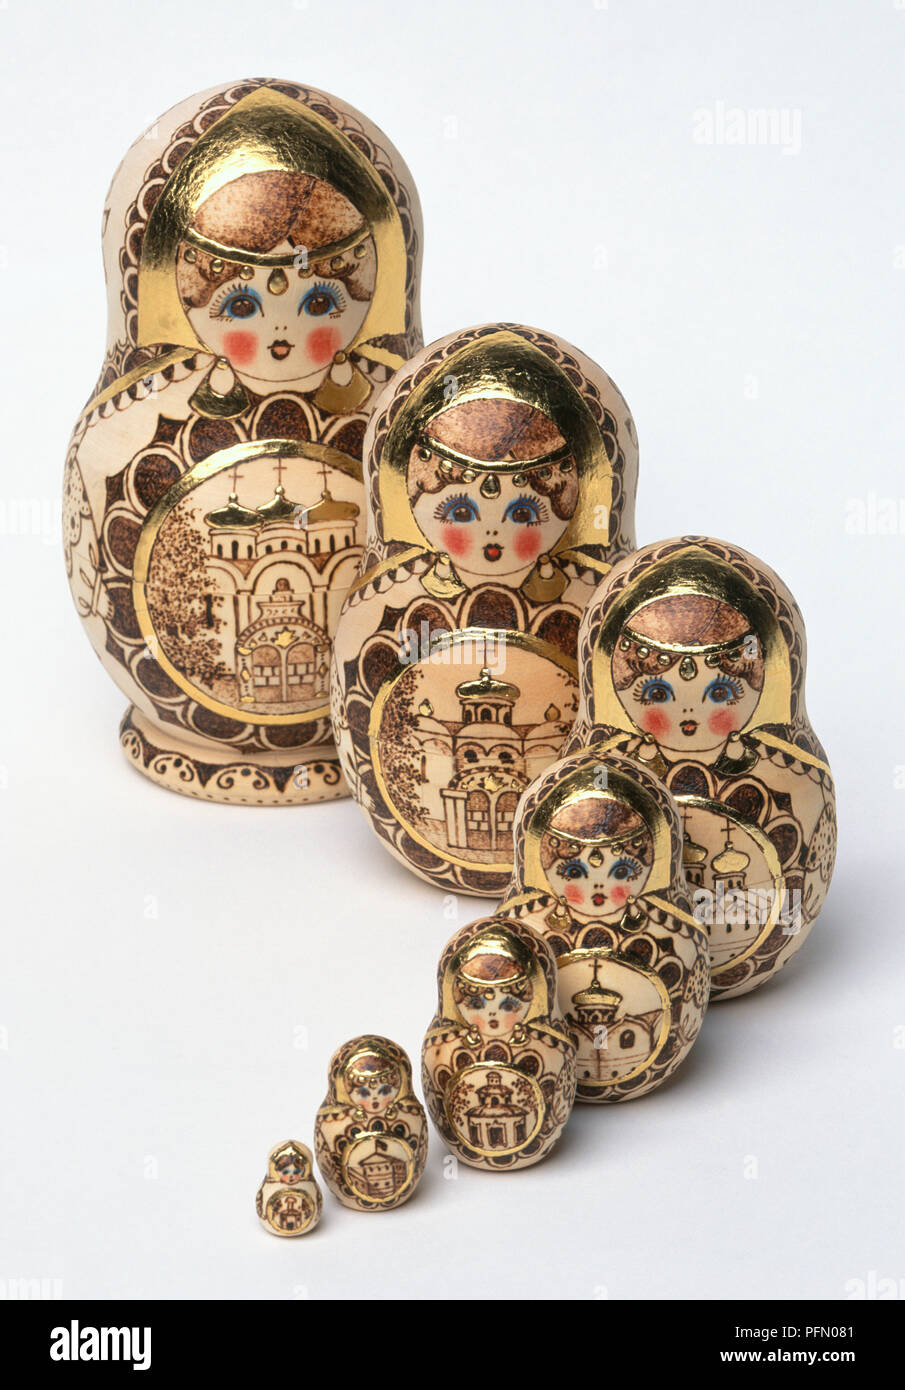 Row of traditional Russian dolls from large to small Stock Photo